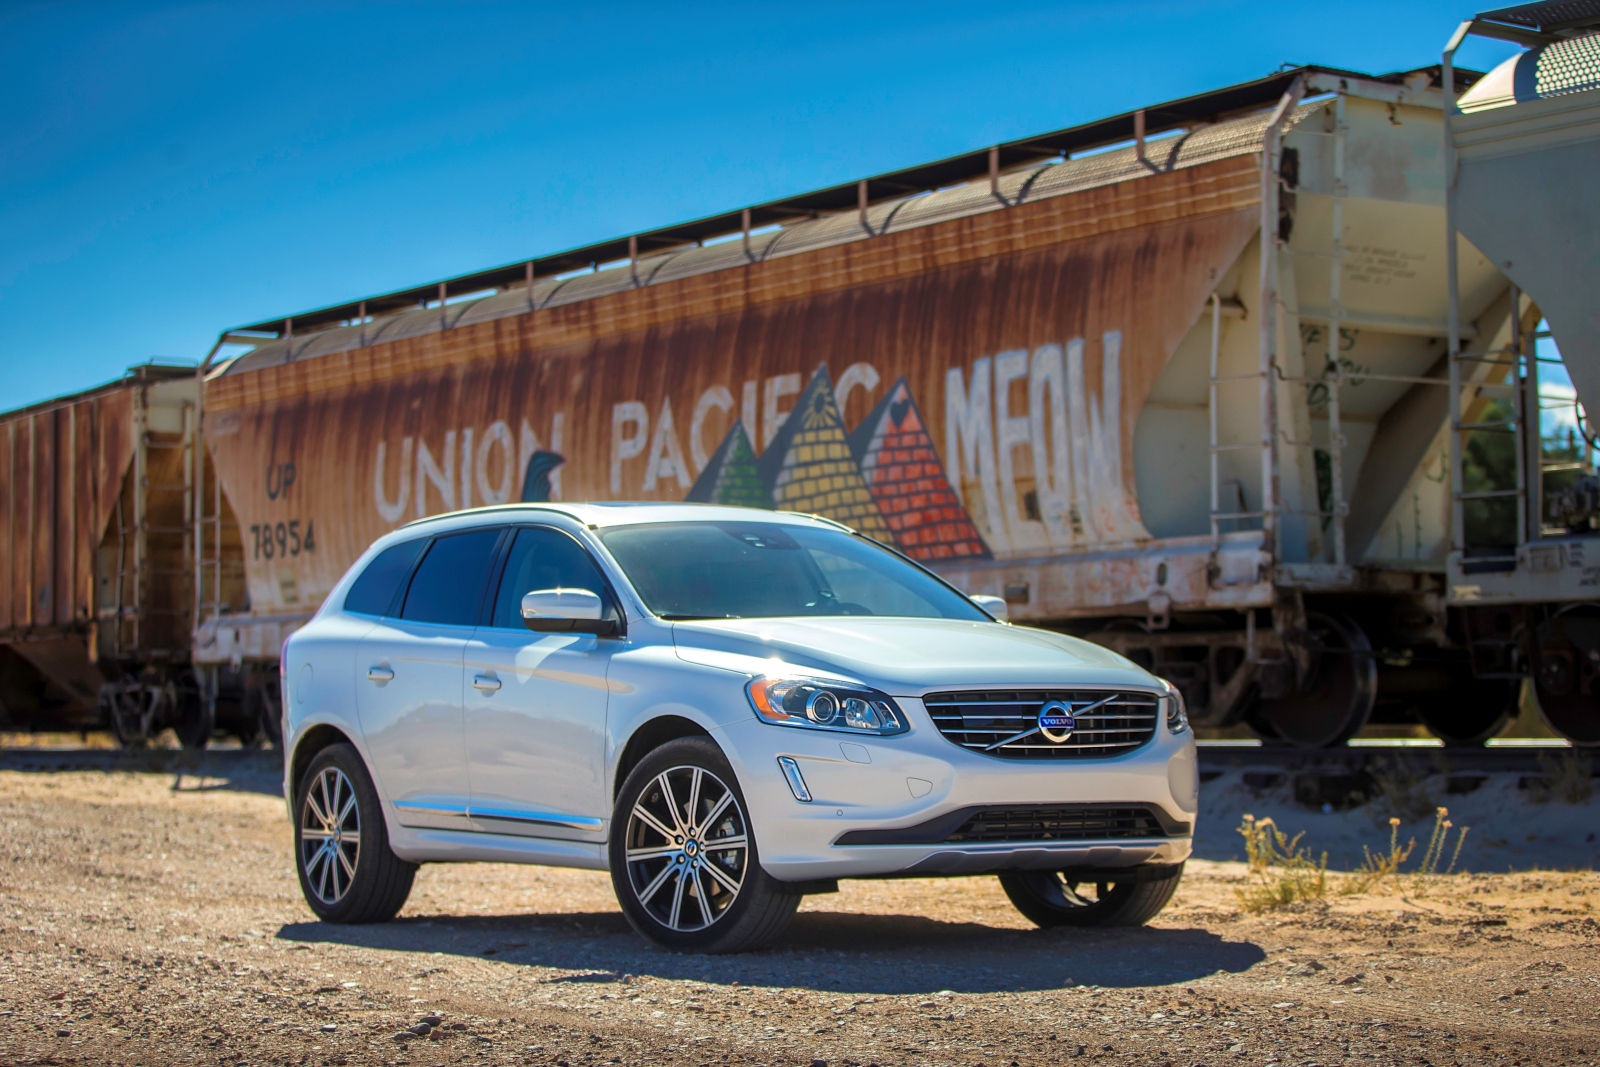 More Bang for Your Buck: A Look at Affordable Pre-Owned Volvo SUVs